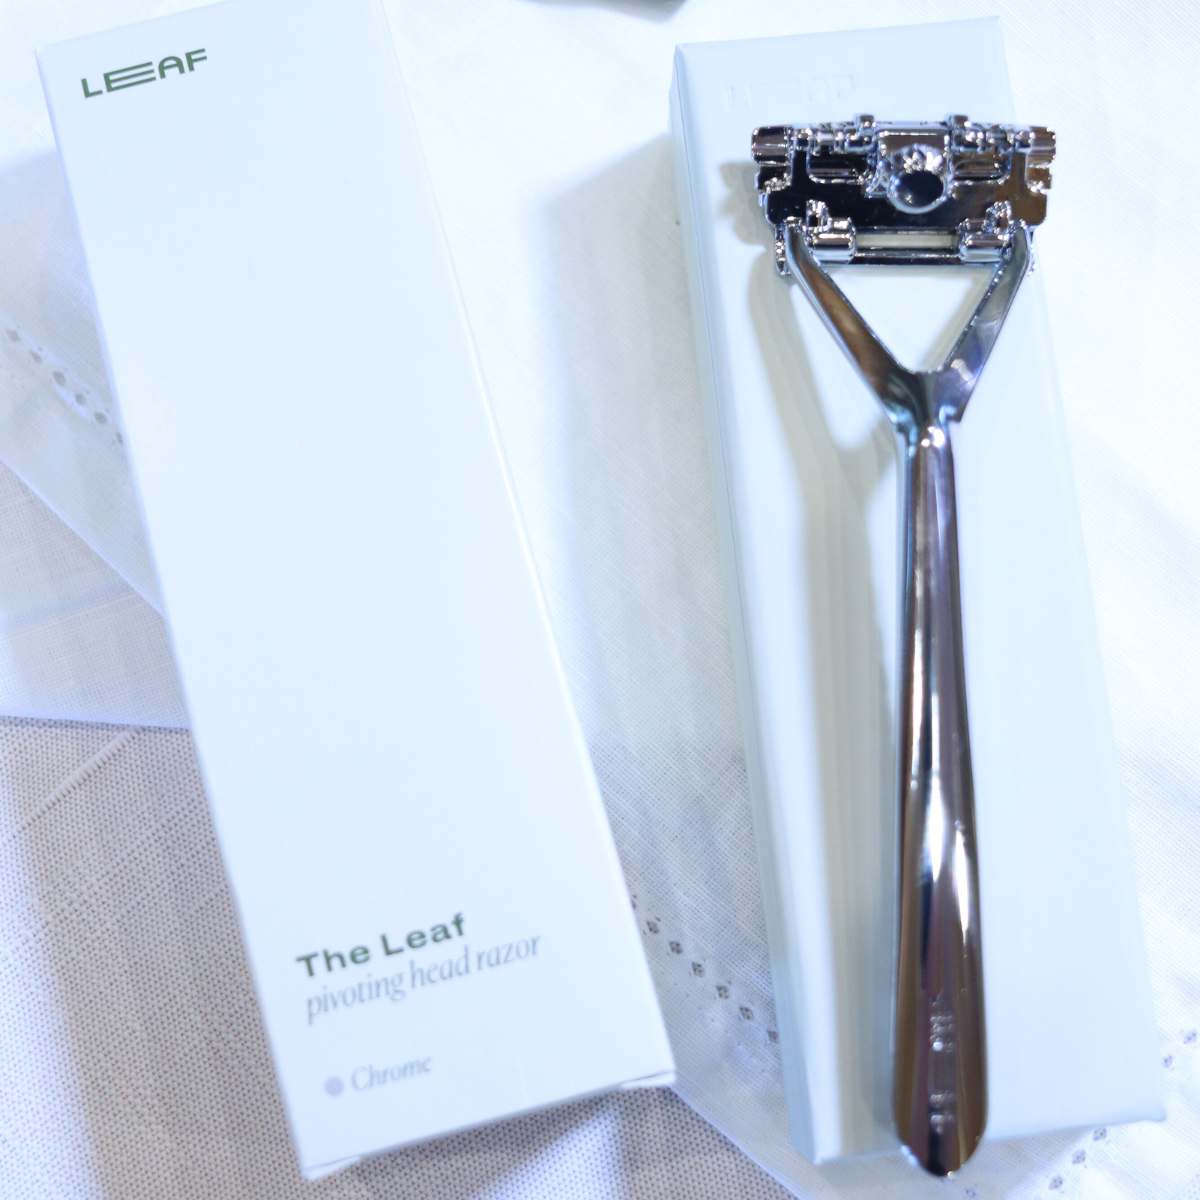 A silver zero waste shave razor sitting next to the white box it comes in. Sitting next to the razor and empty box is a green box or razor blade refills.